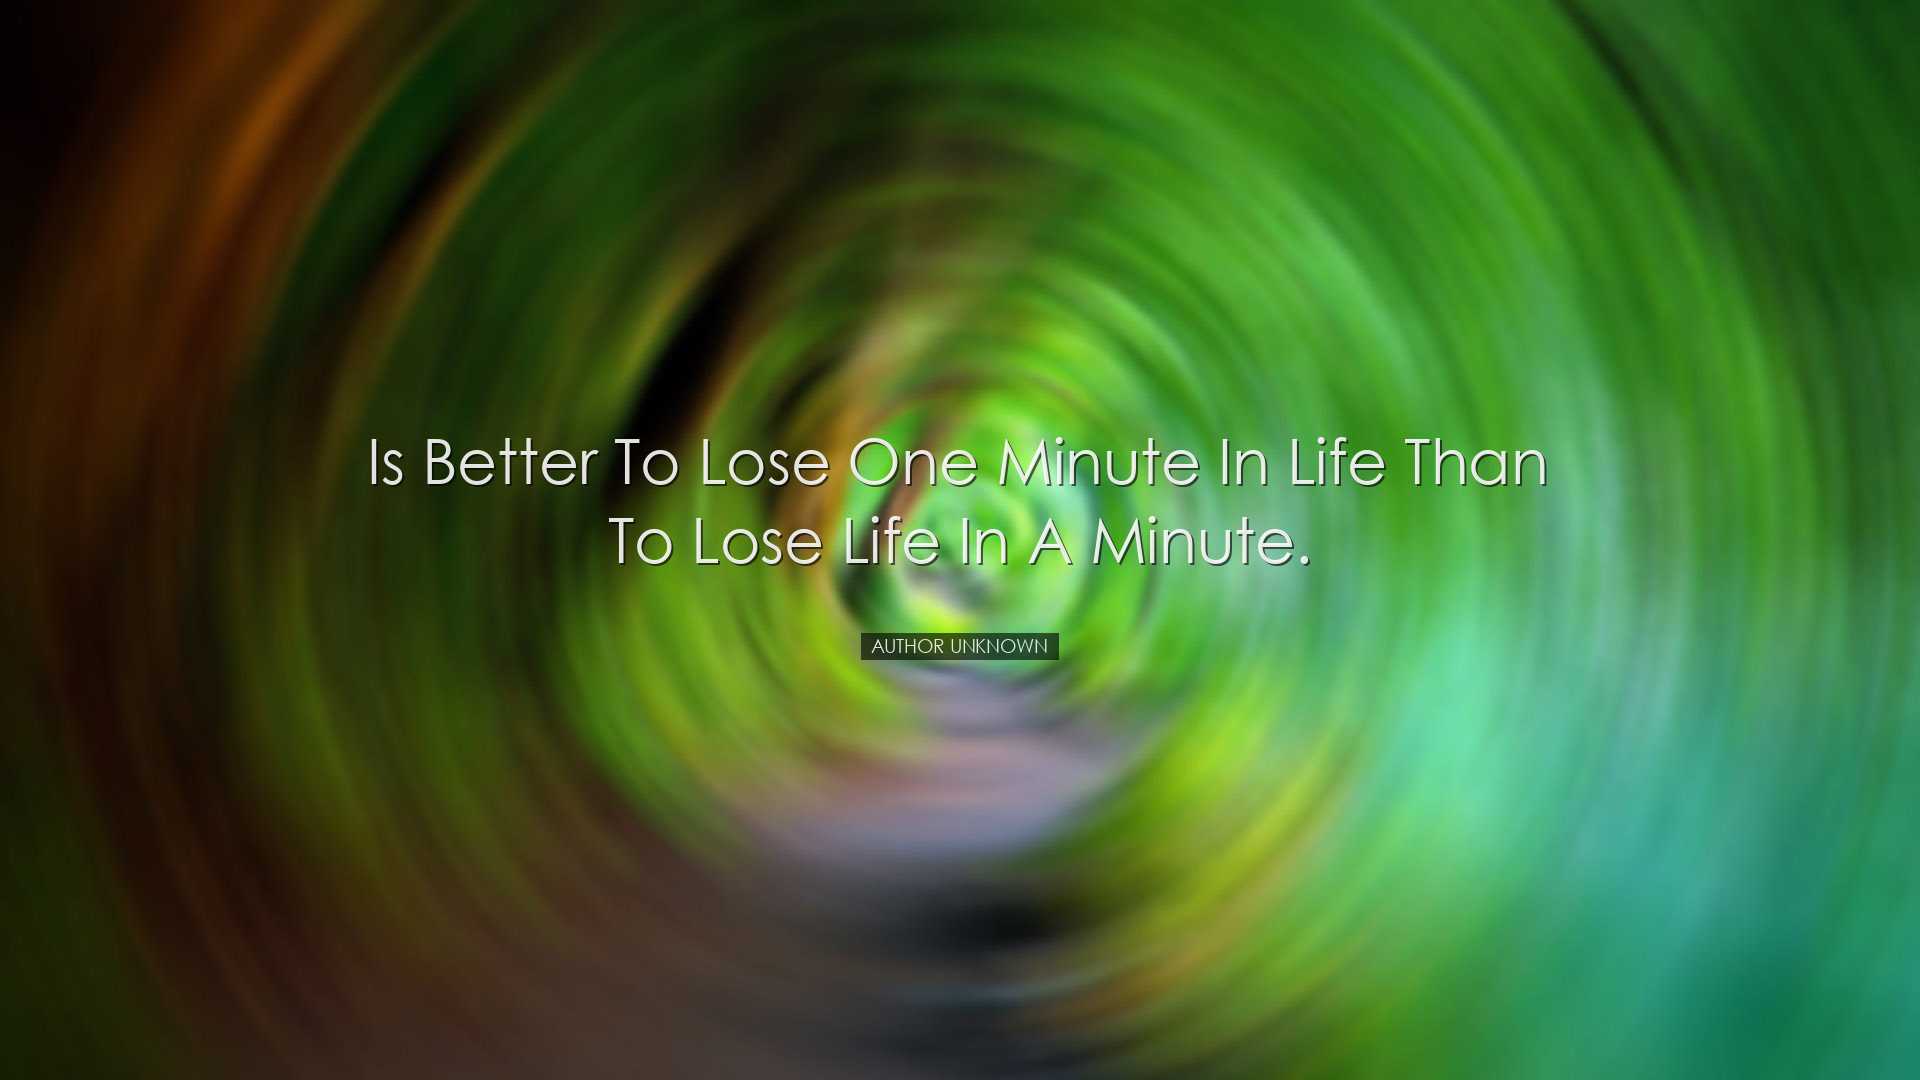 Is better to lose one minute in life than to lose life in a minute